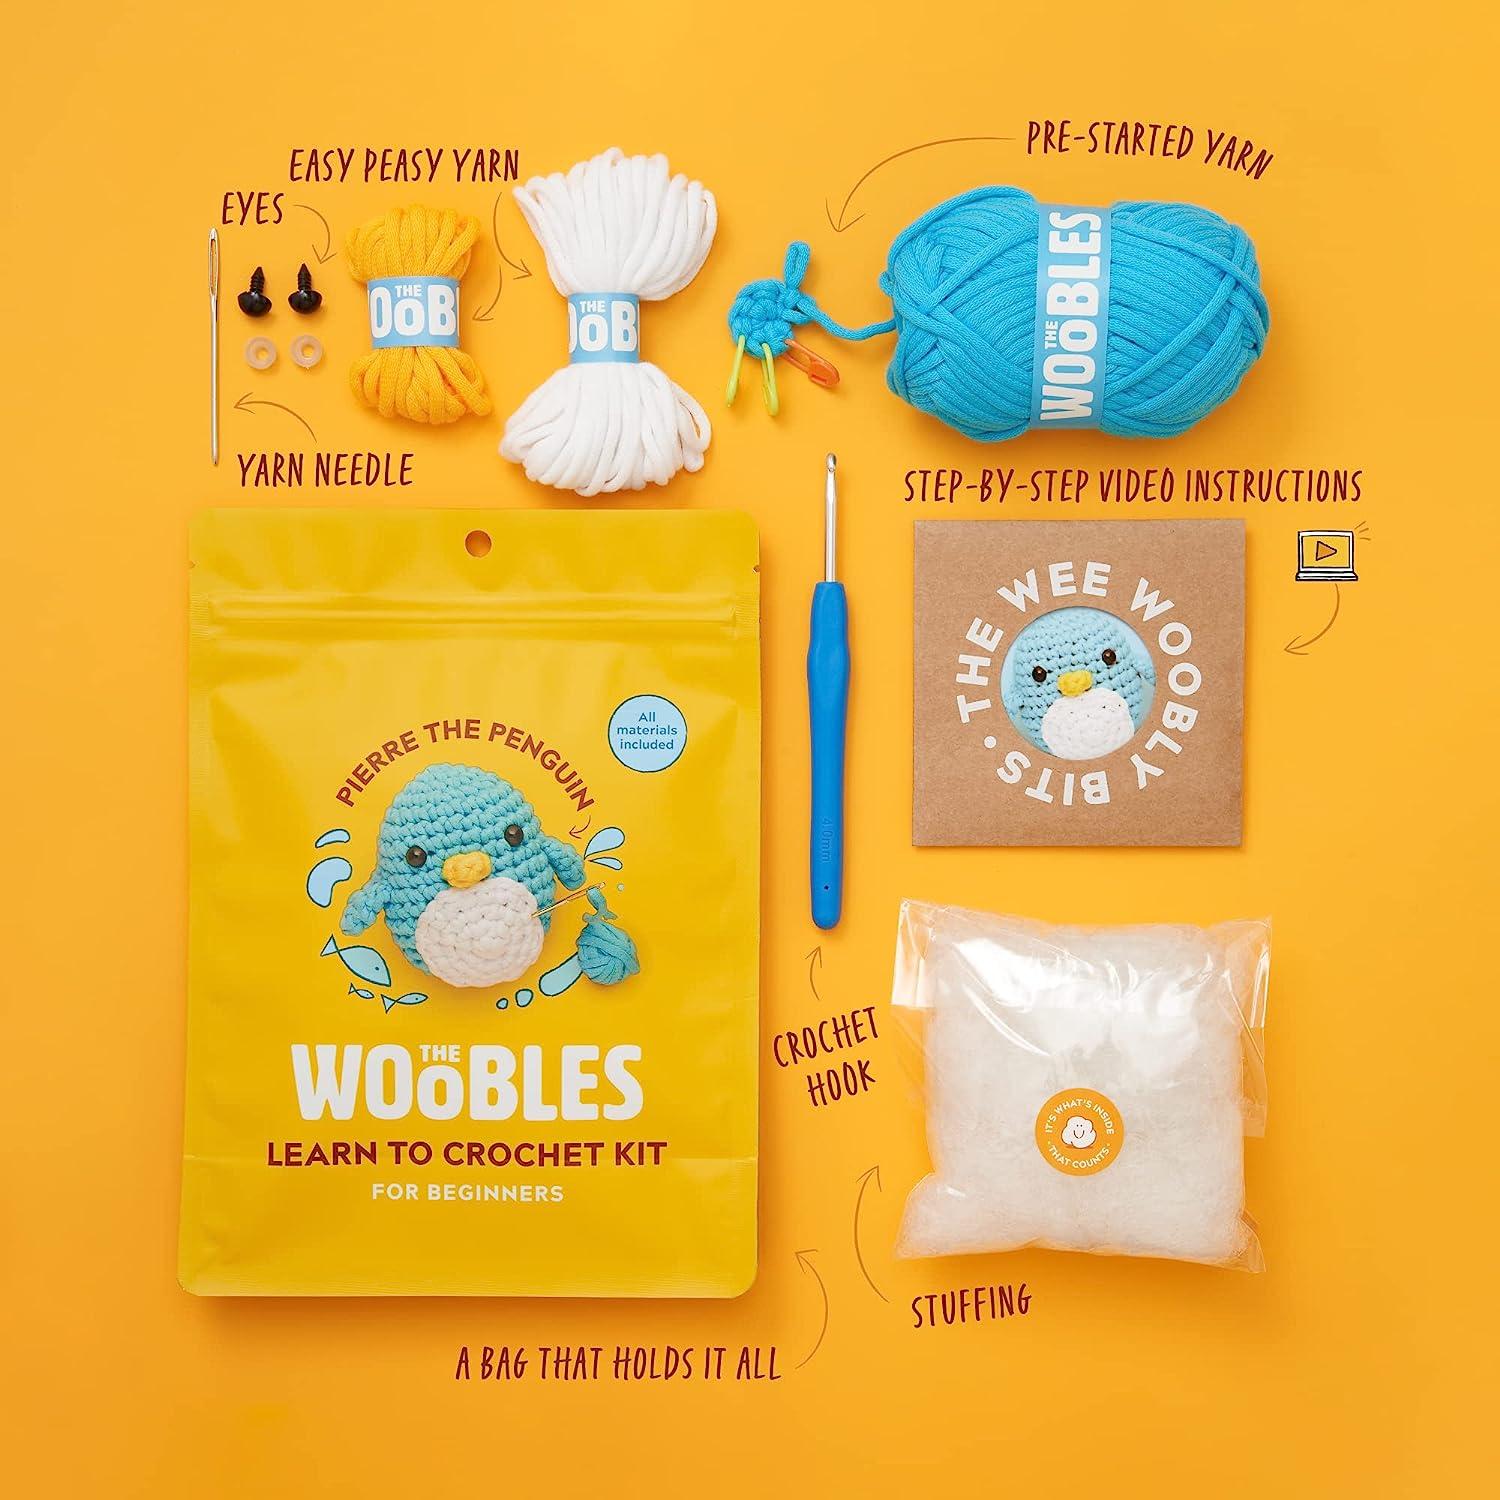 The Woobles Beginners Crochet Kit with Easy Peasy Yarn as seen on